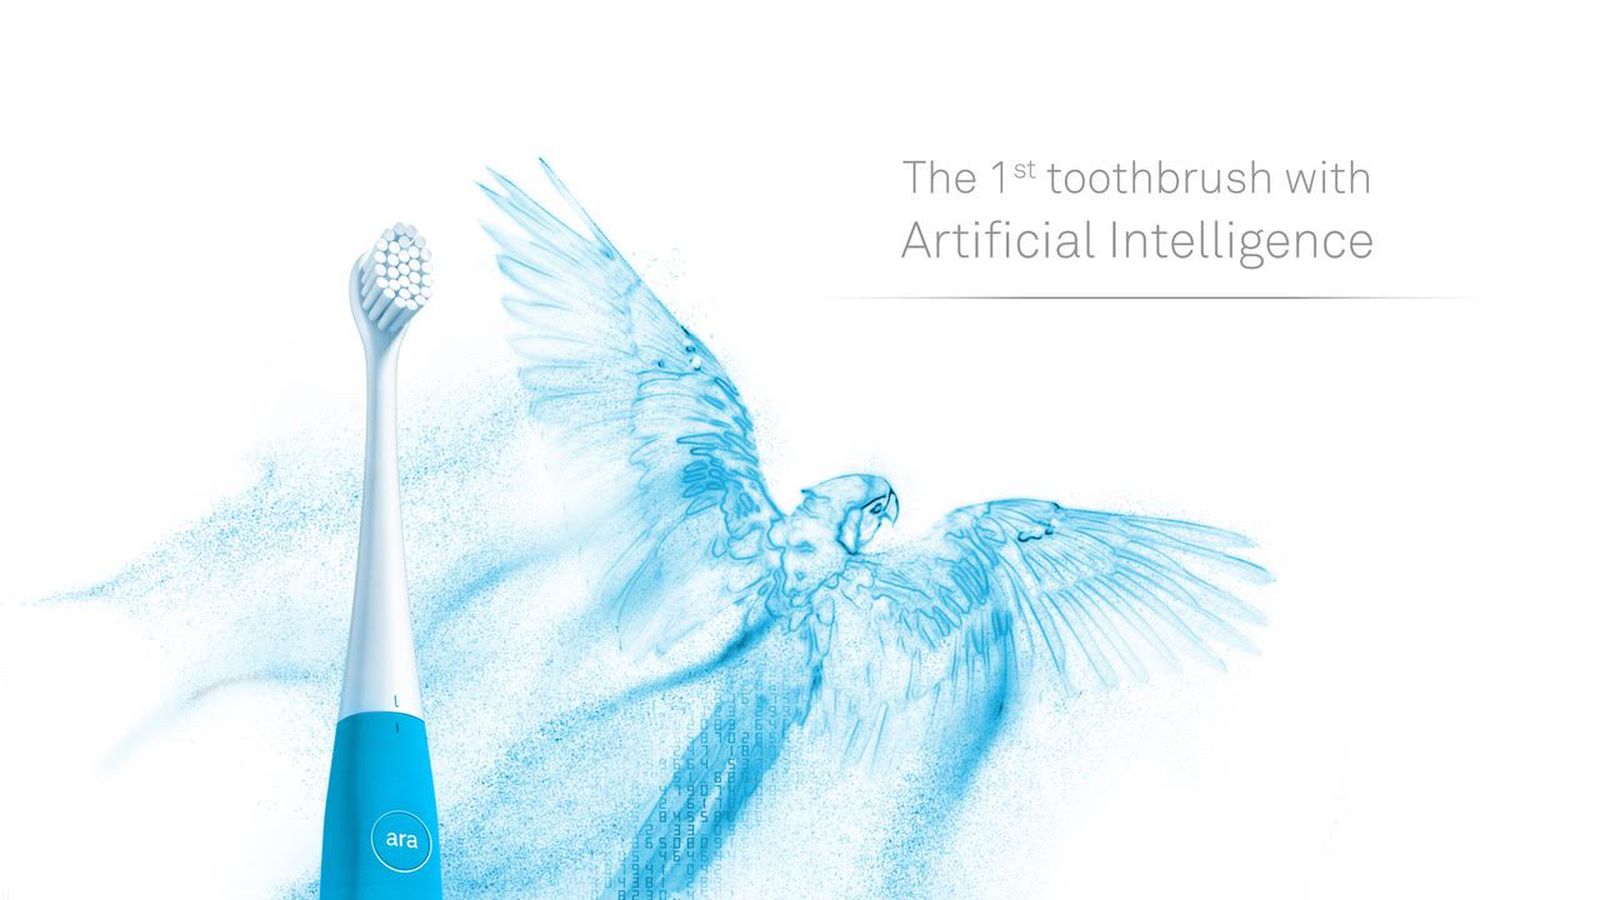 robotic toothbrush with Artificial Intelligence is another latest medical gadget